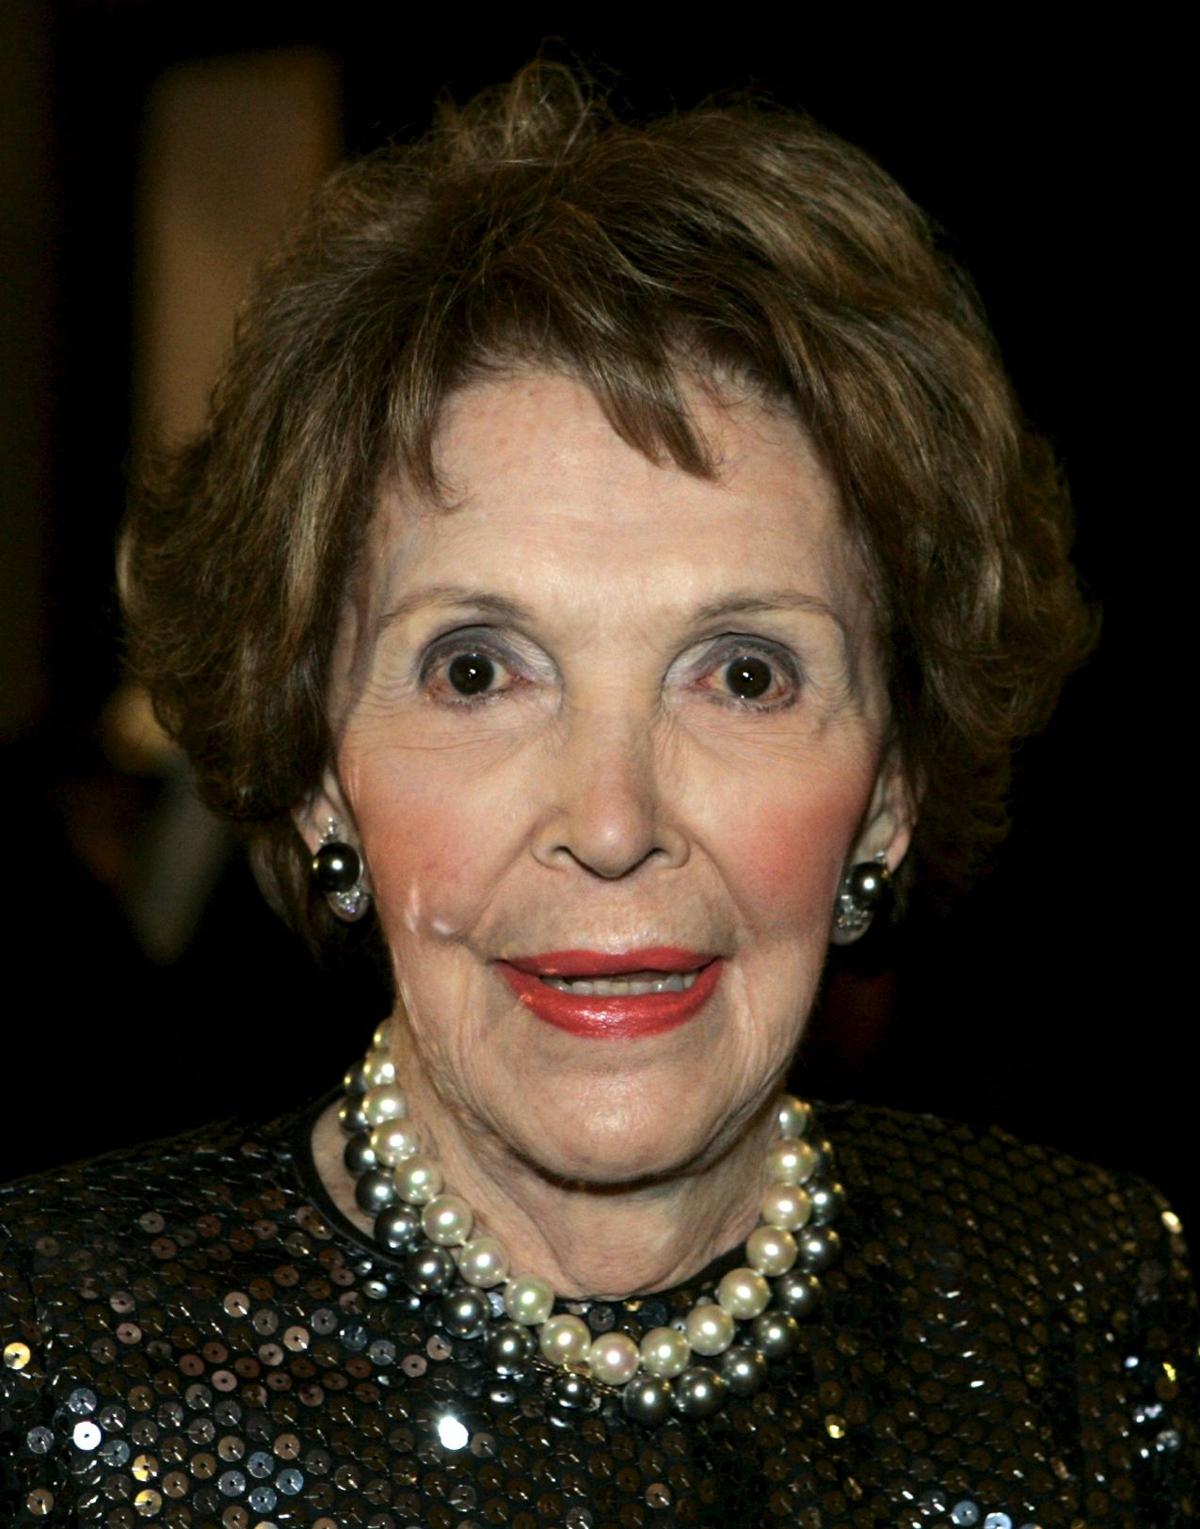 Former First Lady Nancy Reagan through the years | Slideshows ...